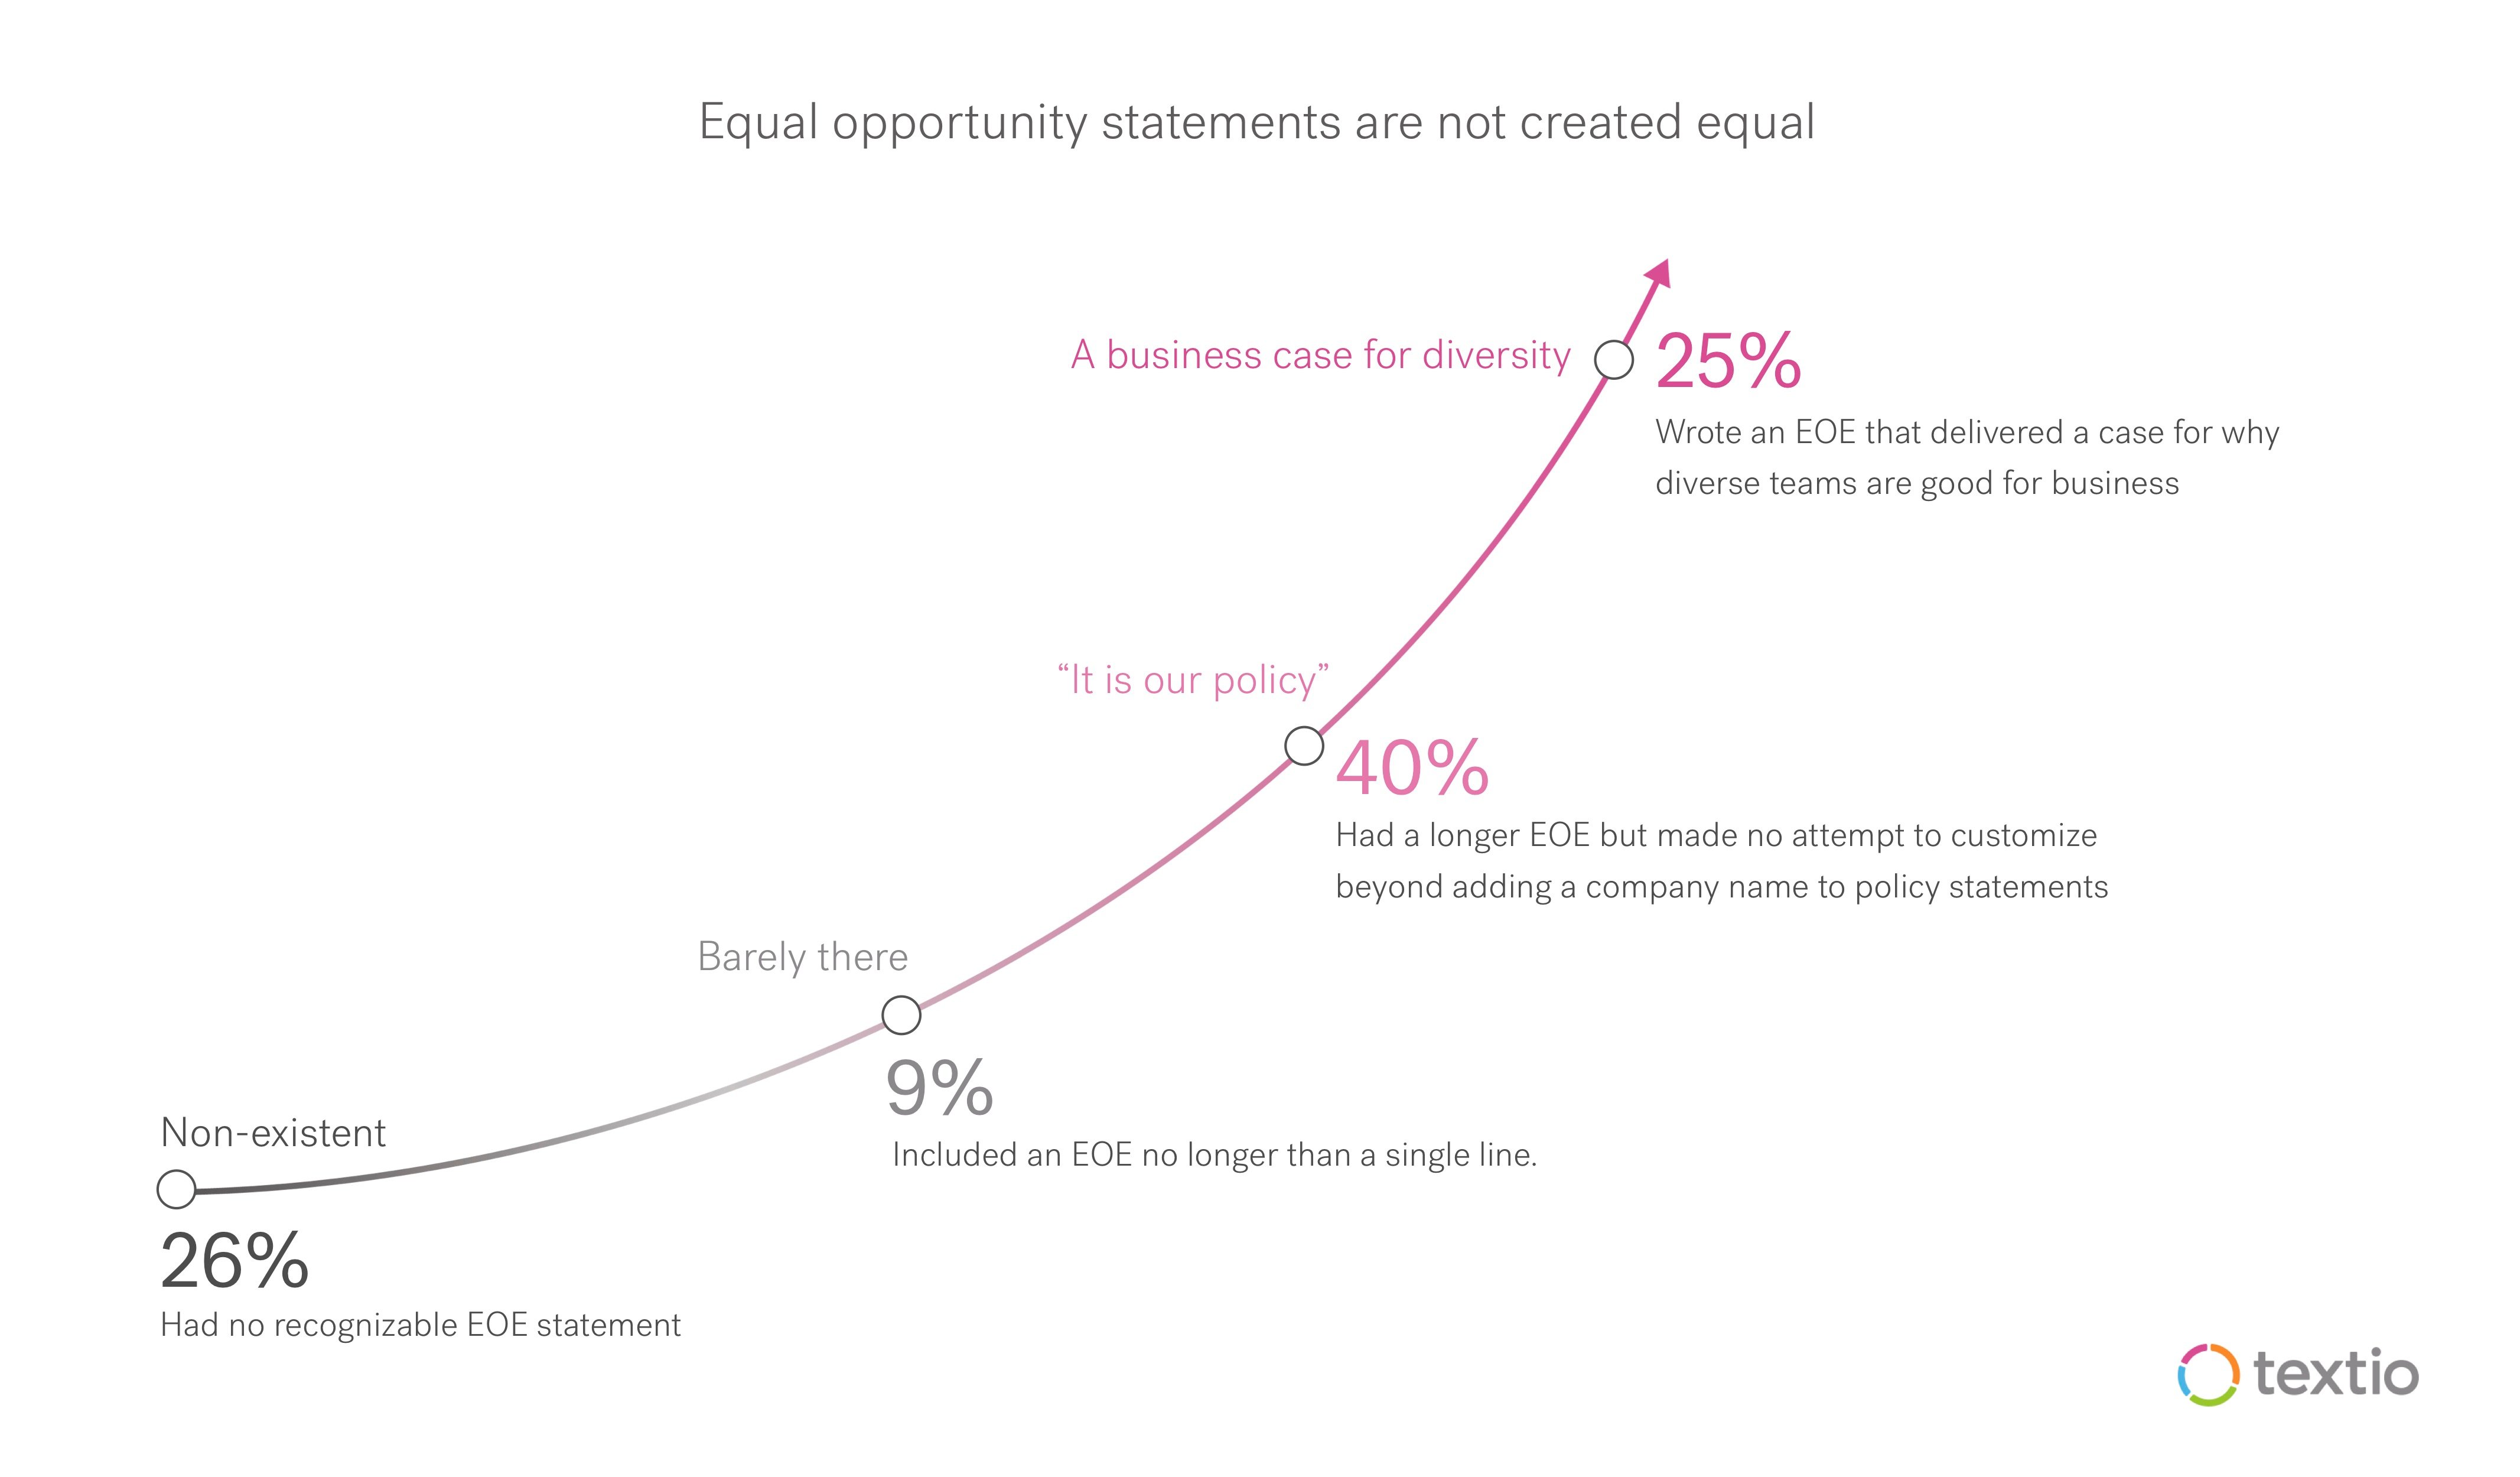 A curved line going up and to the right with 4 data points illustrating equal opportunity statements and their distribution: non-existent (26%), barely there (9%), "It's our policy" (40%), and A business case for diversity (25%)